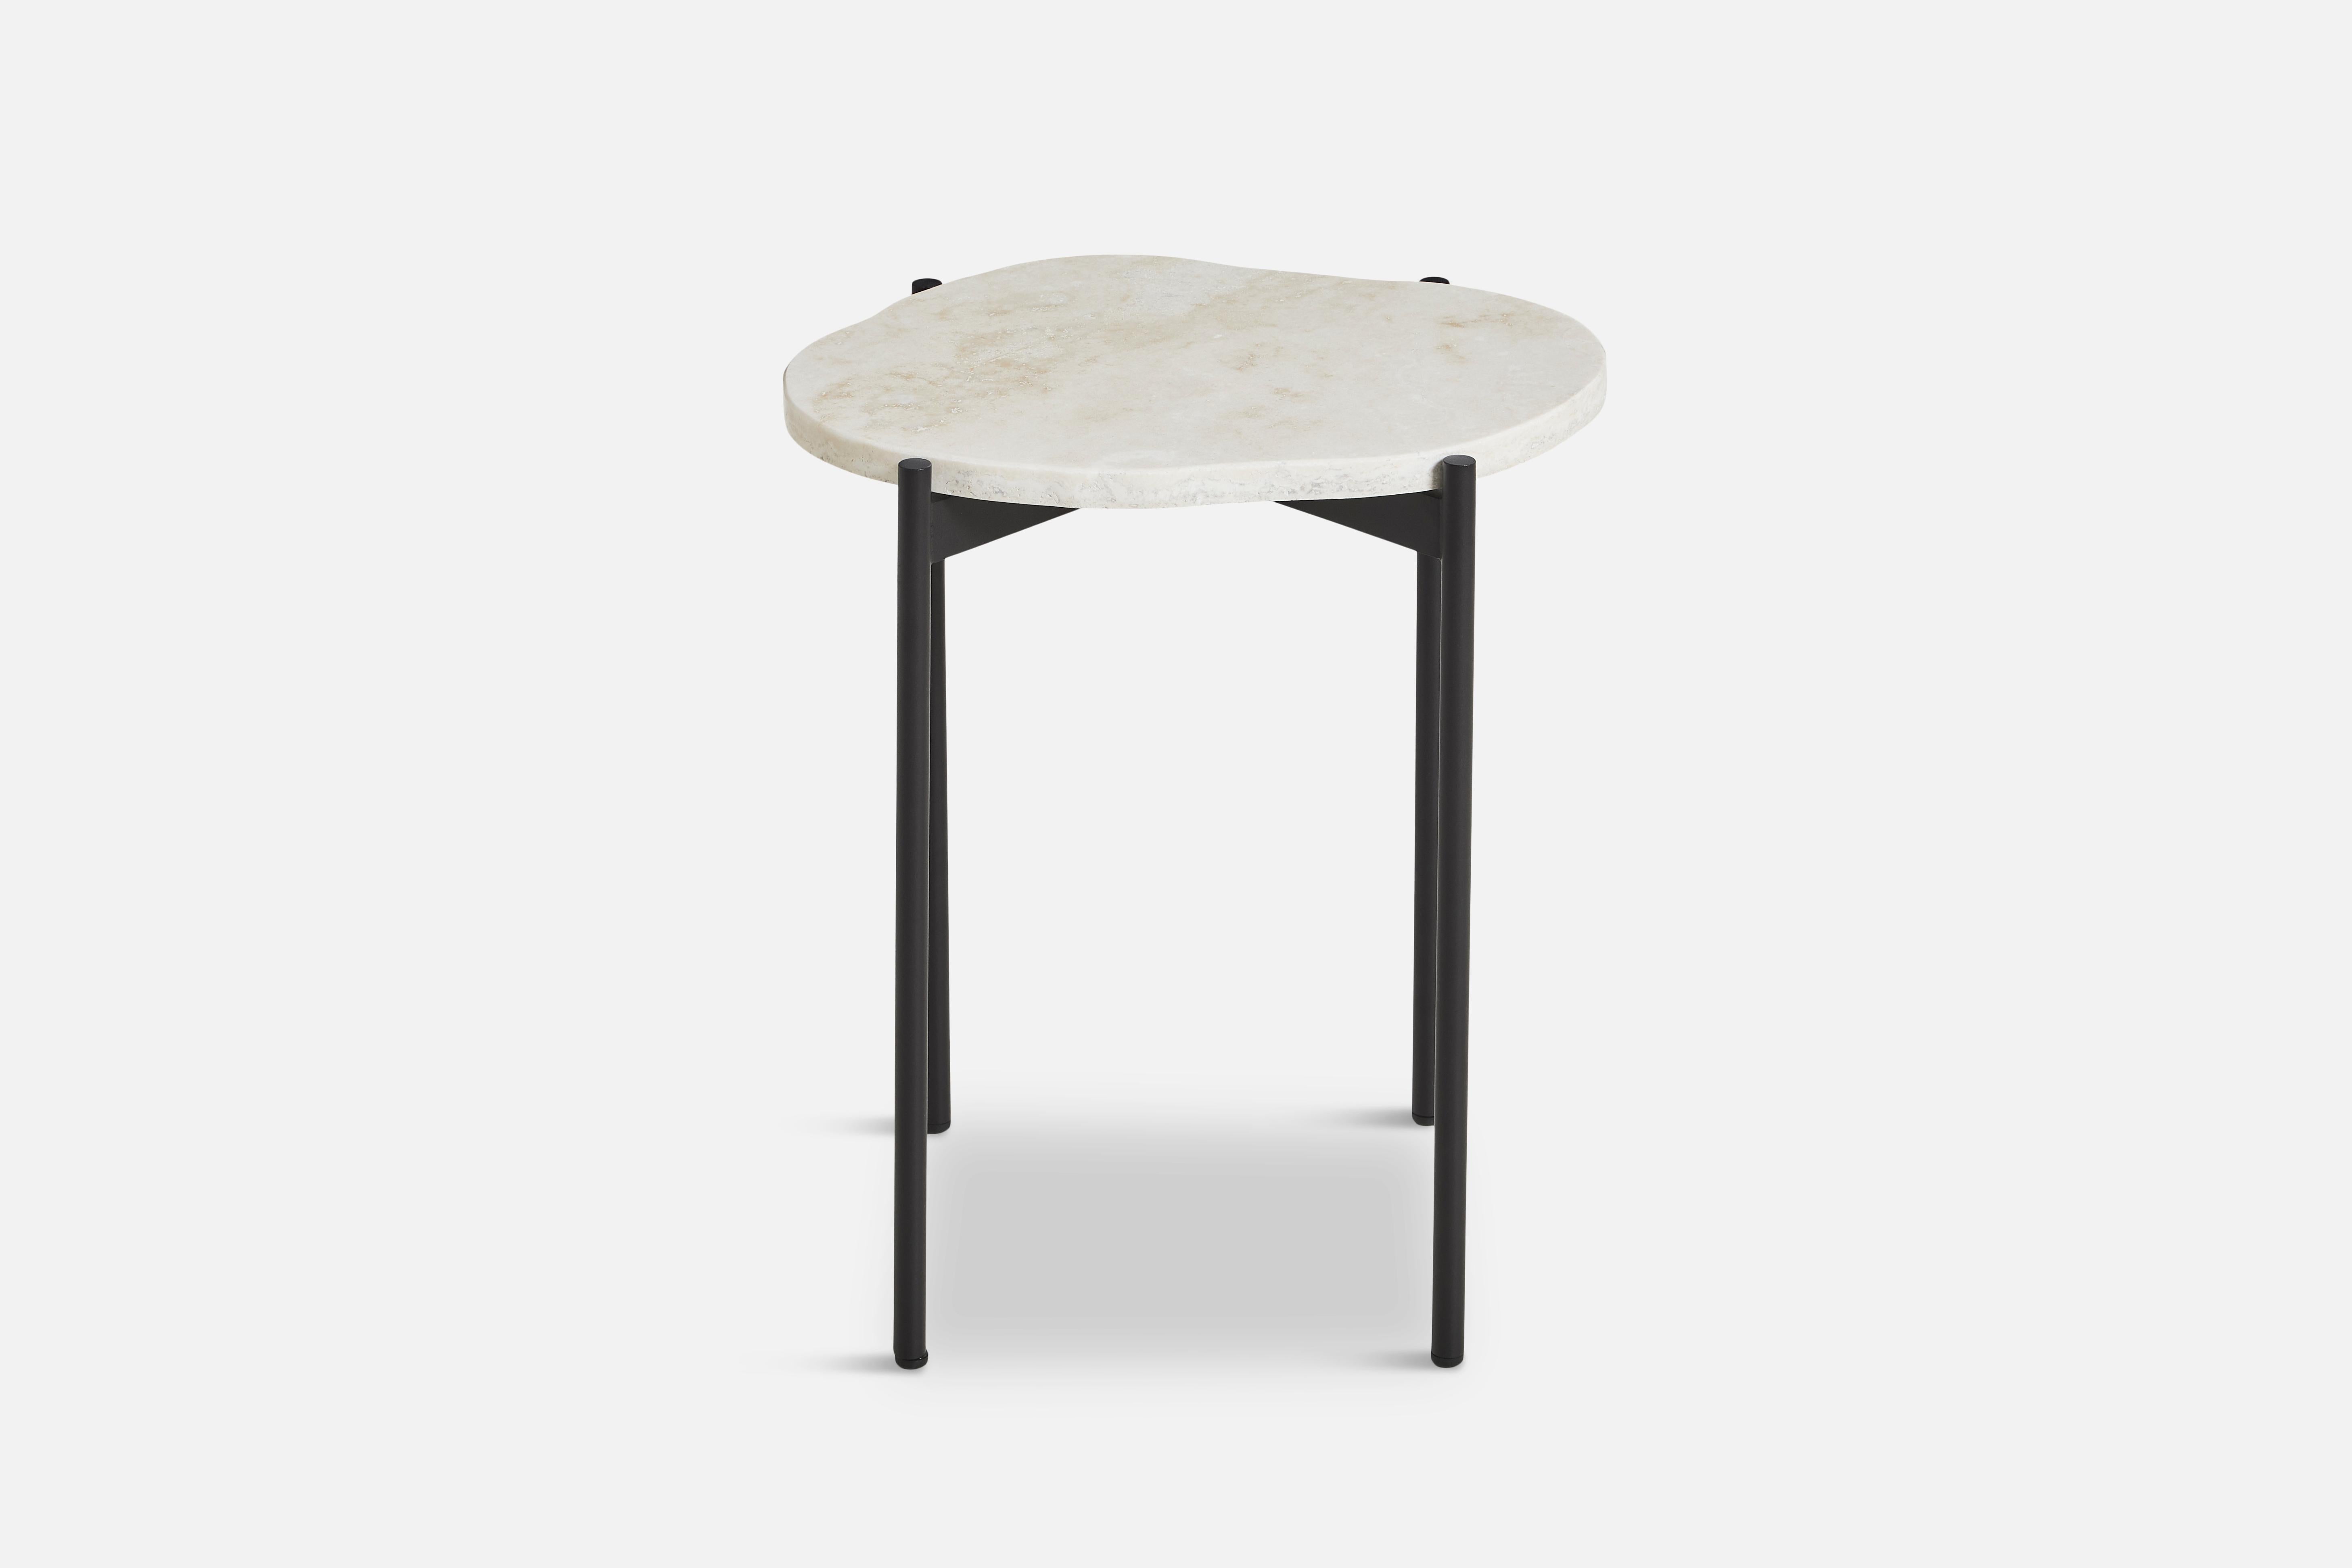 La Terra small occasional table by Agnes Morguet
Materials: Metal, Ivory Travertine.
Dimensions: D 31.2 x W 40.5 x H 45.7 cm

The founders, Mia and Torben Koed, decided to put their 30 years of experience into a new project. It was time for a change